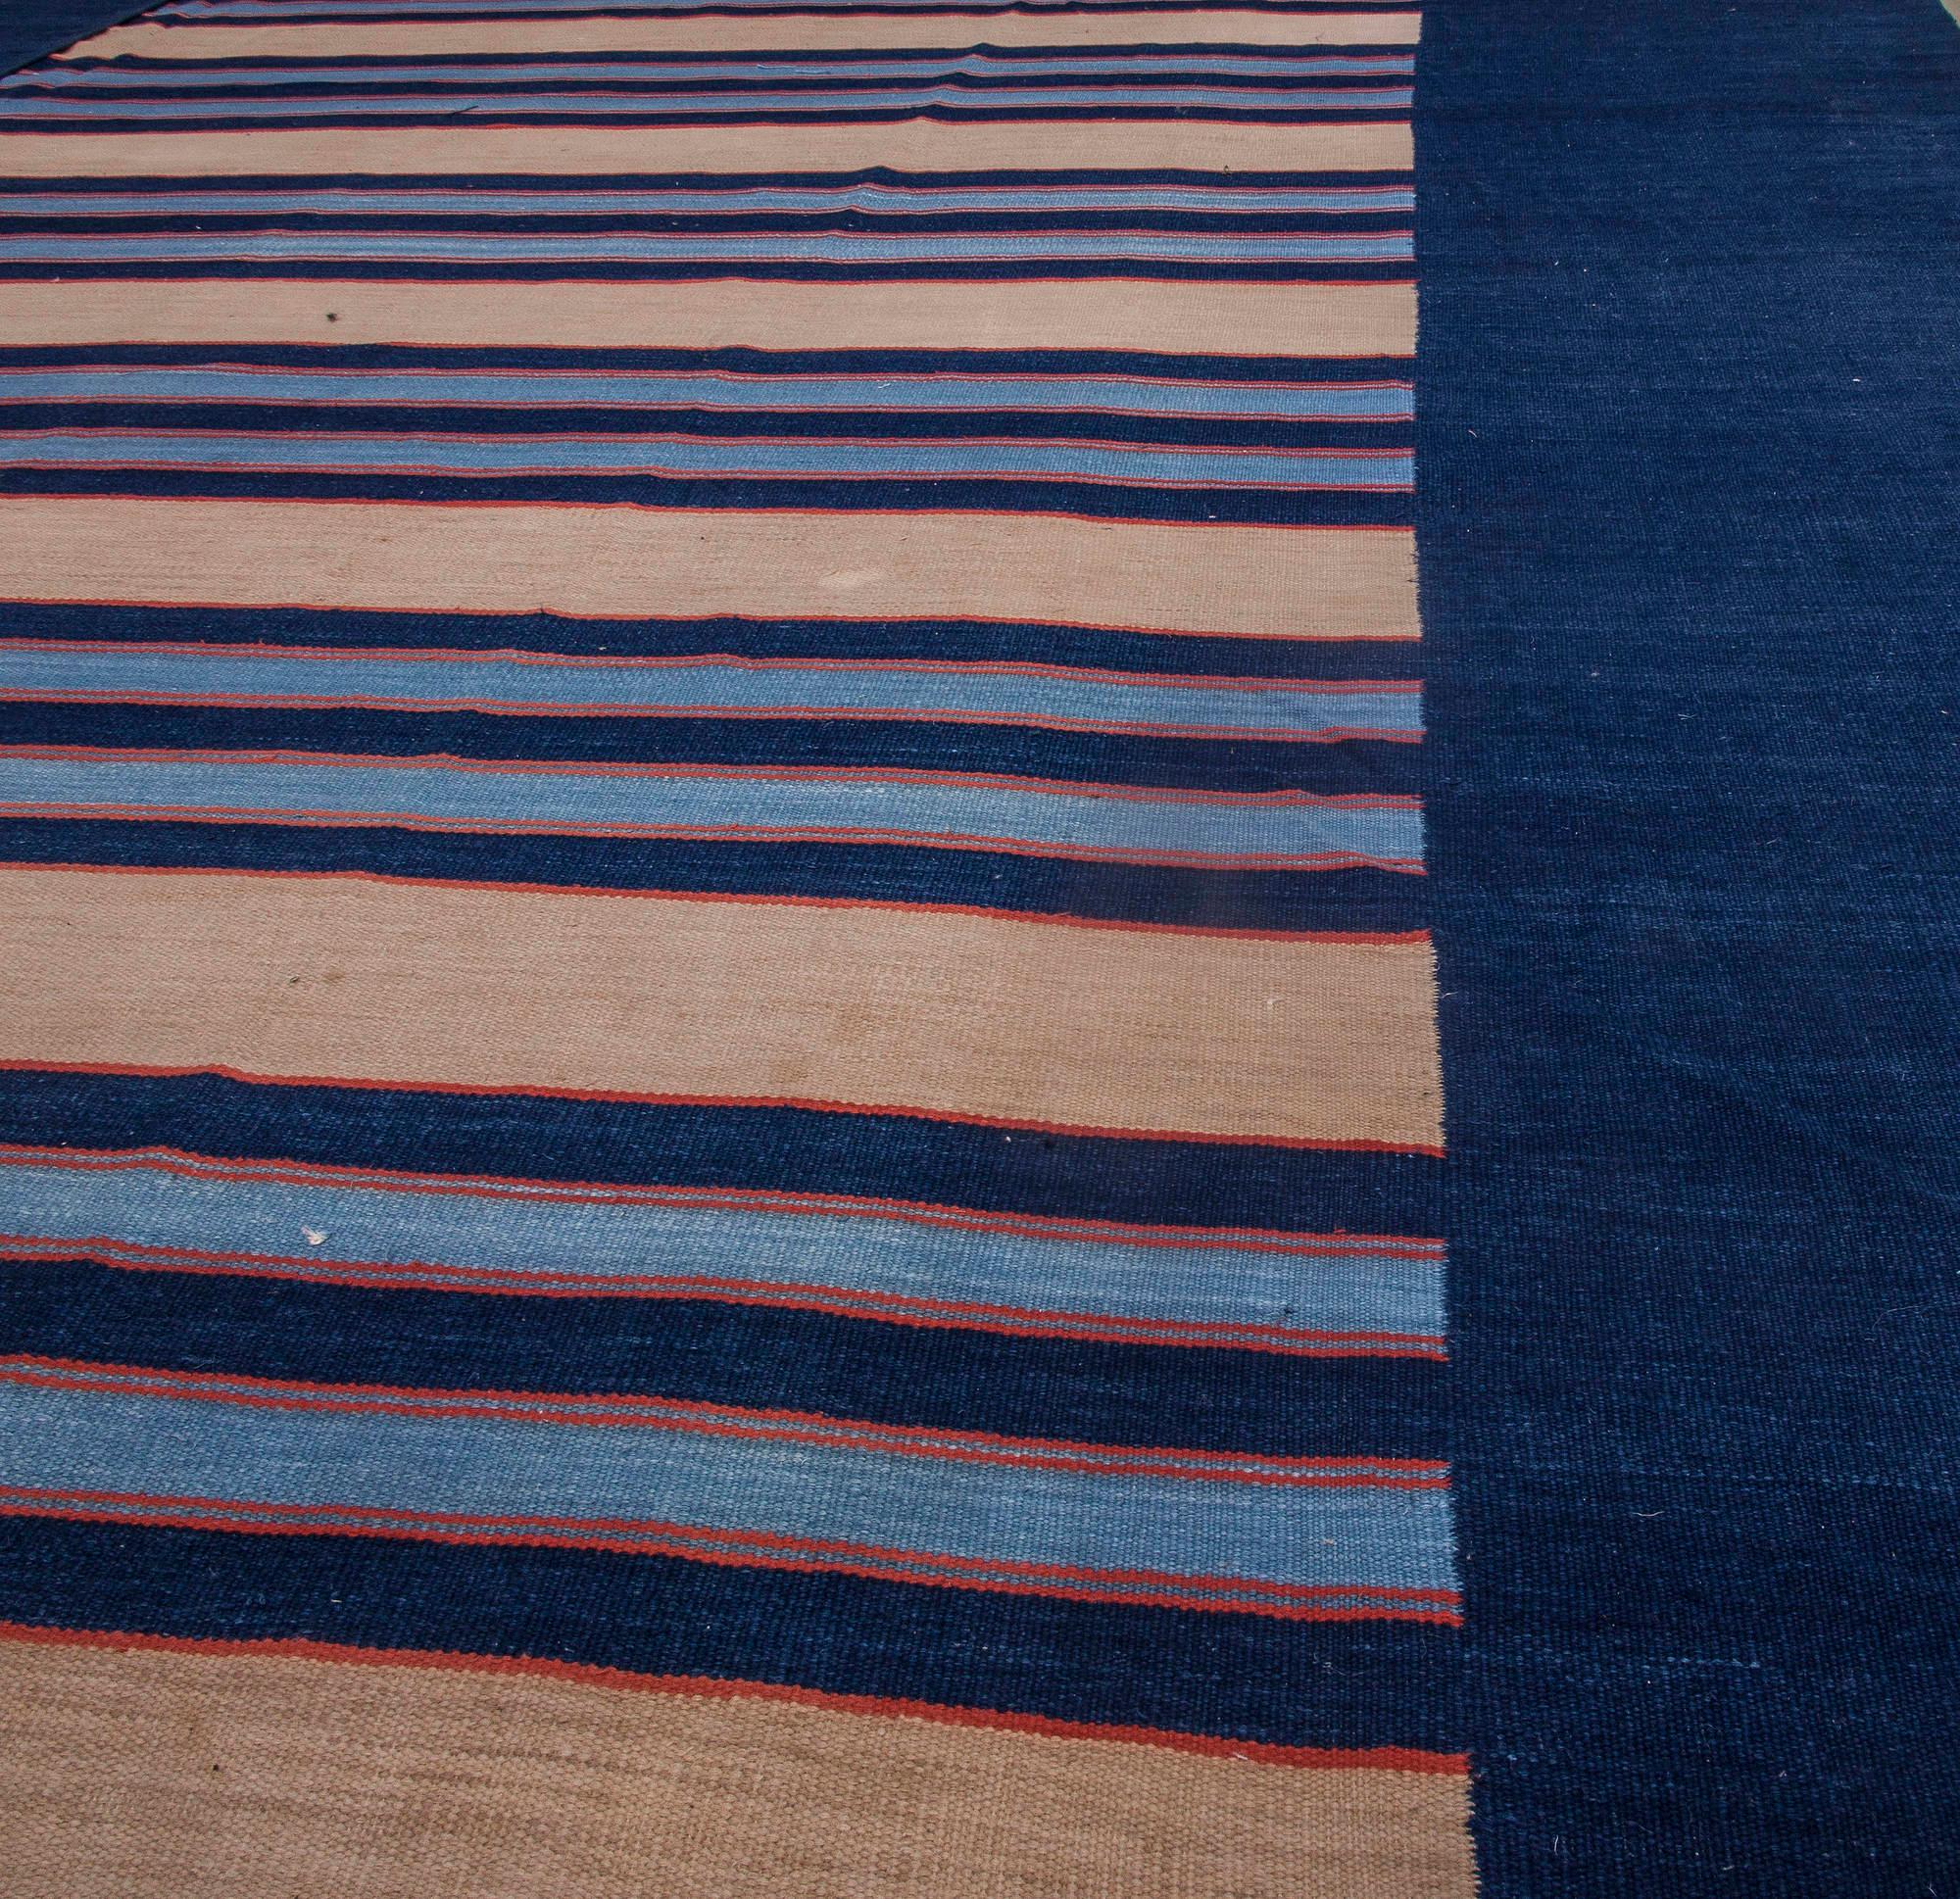 Hand-Woven Mid-20th Century Striped Indian Dhurrie Rug For Sale